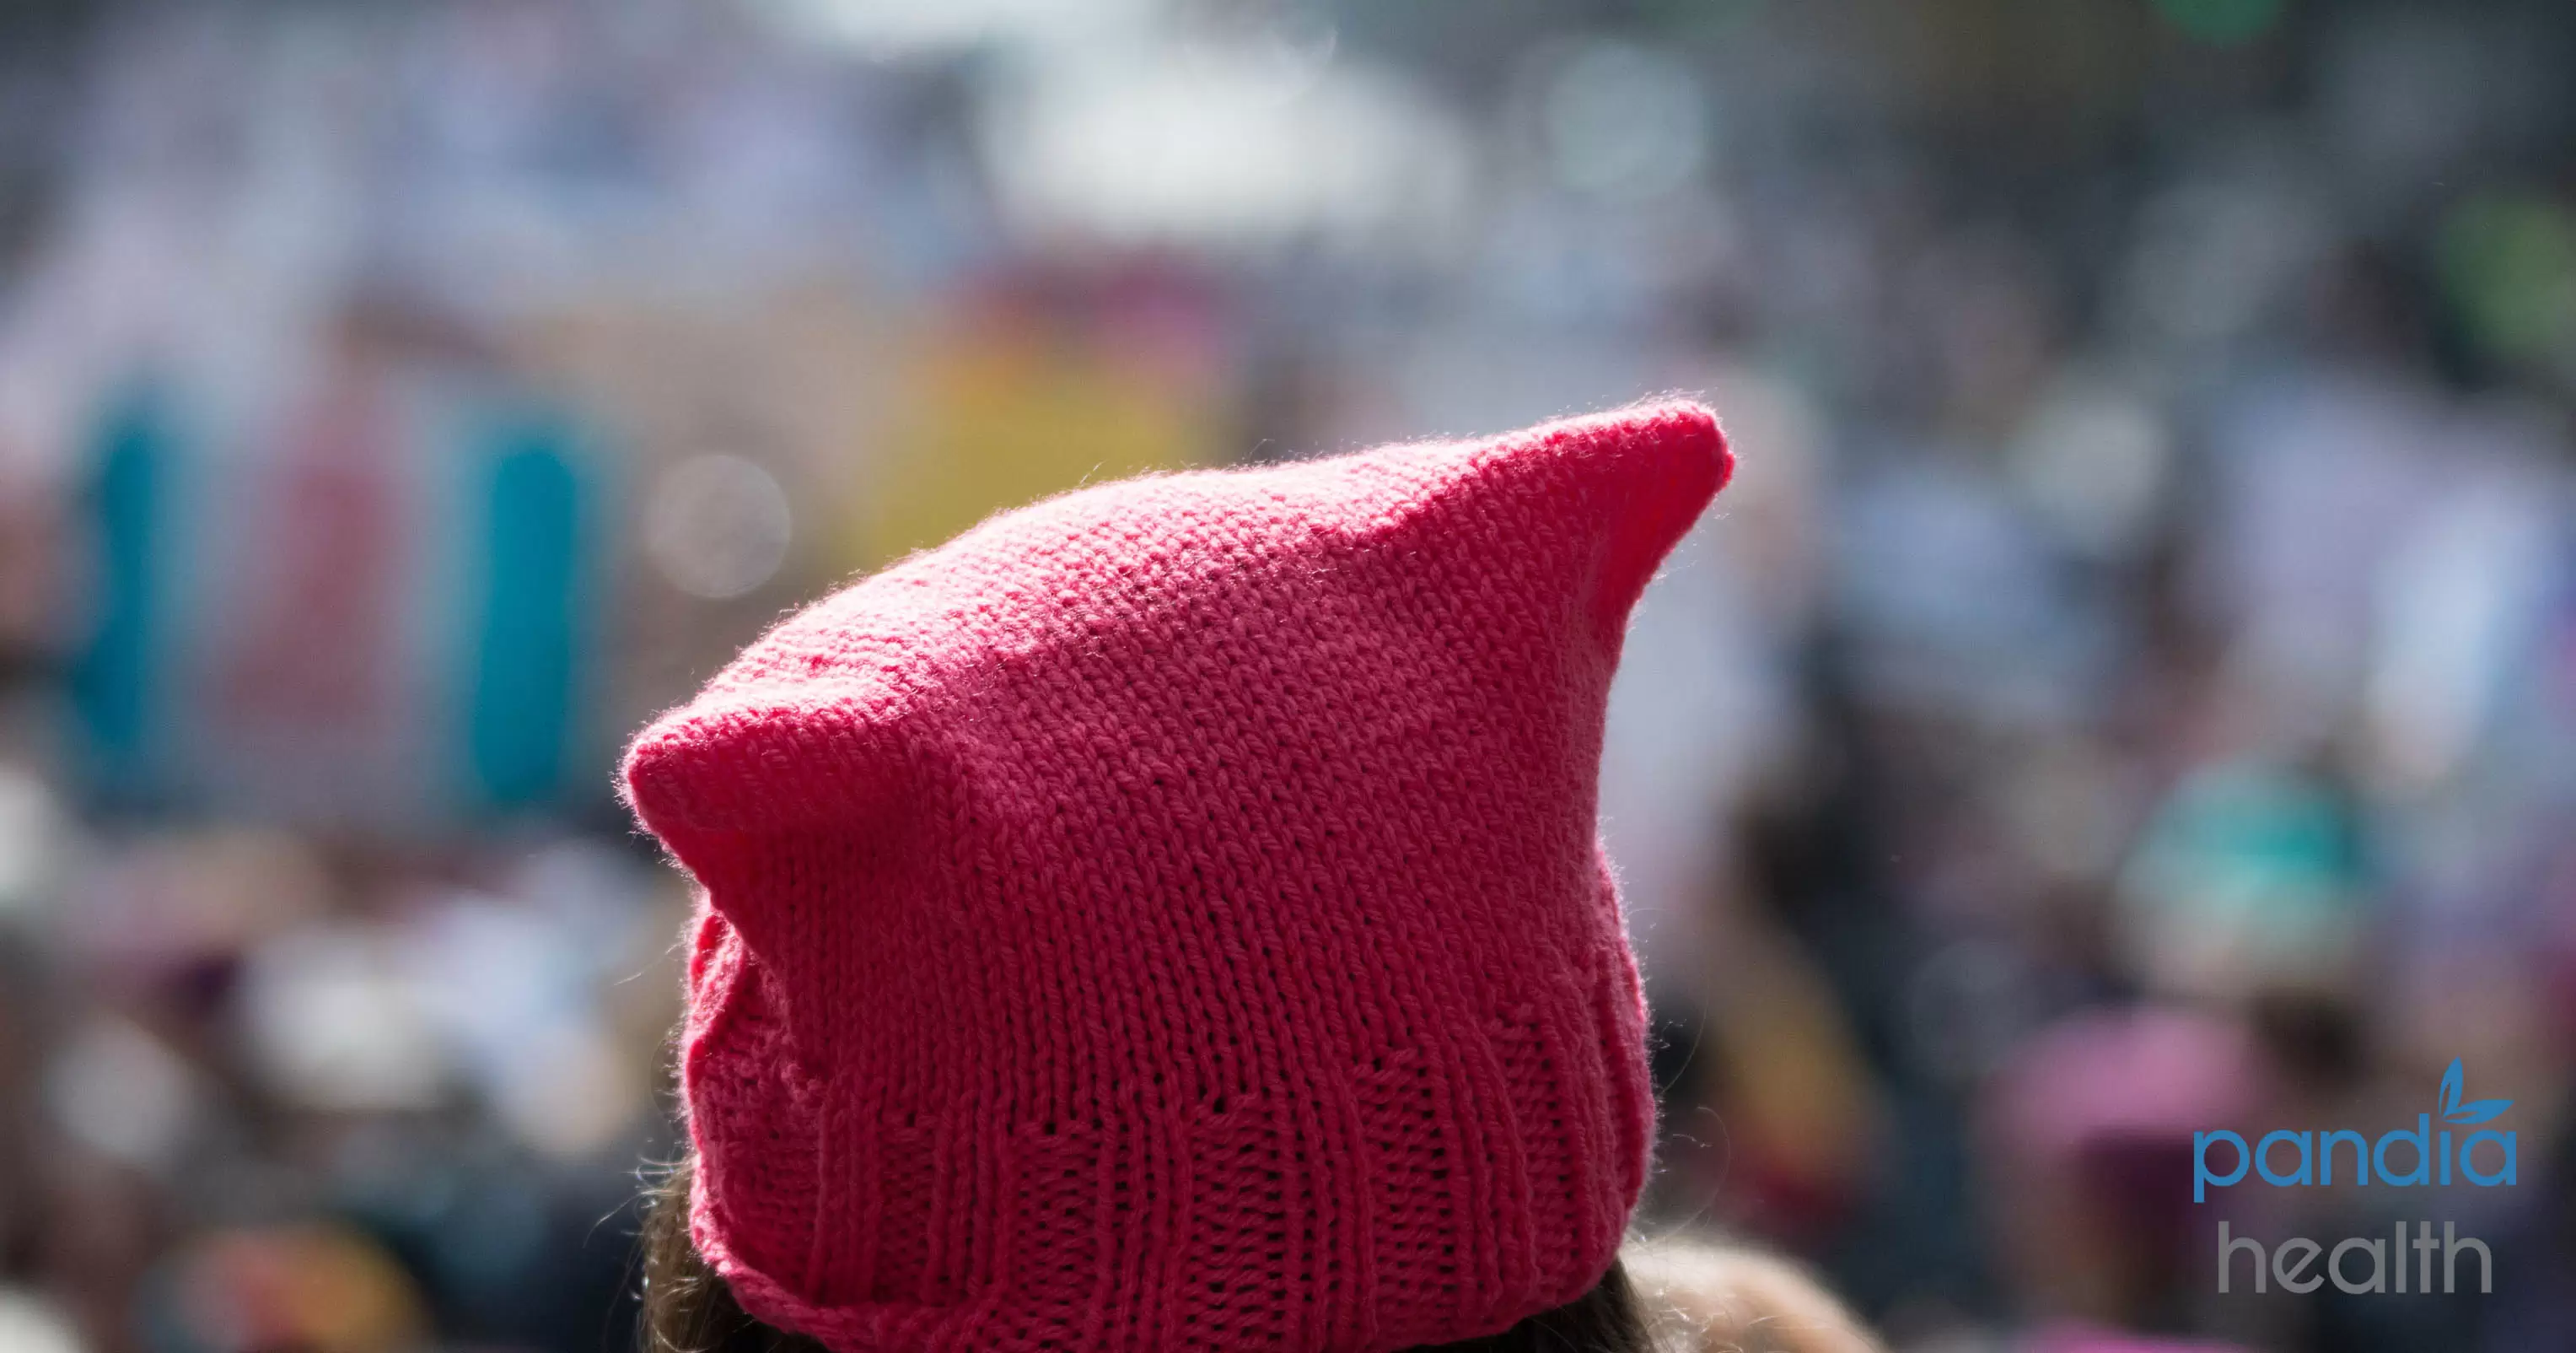 Women's march pink pussyhat